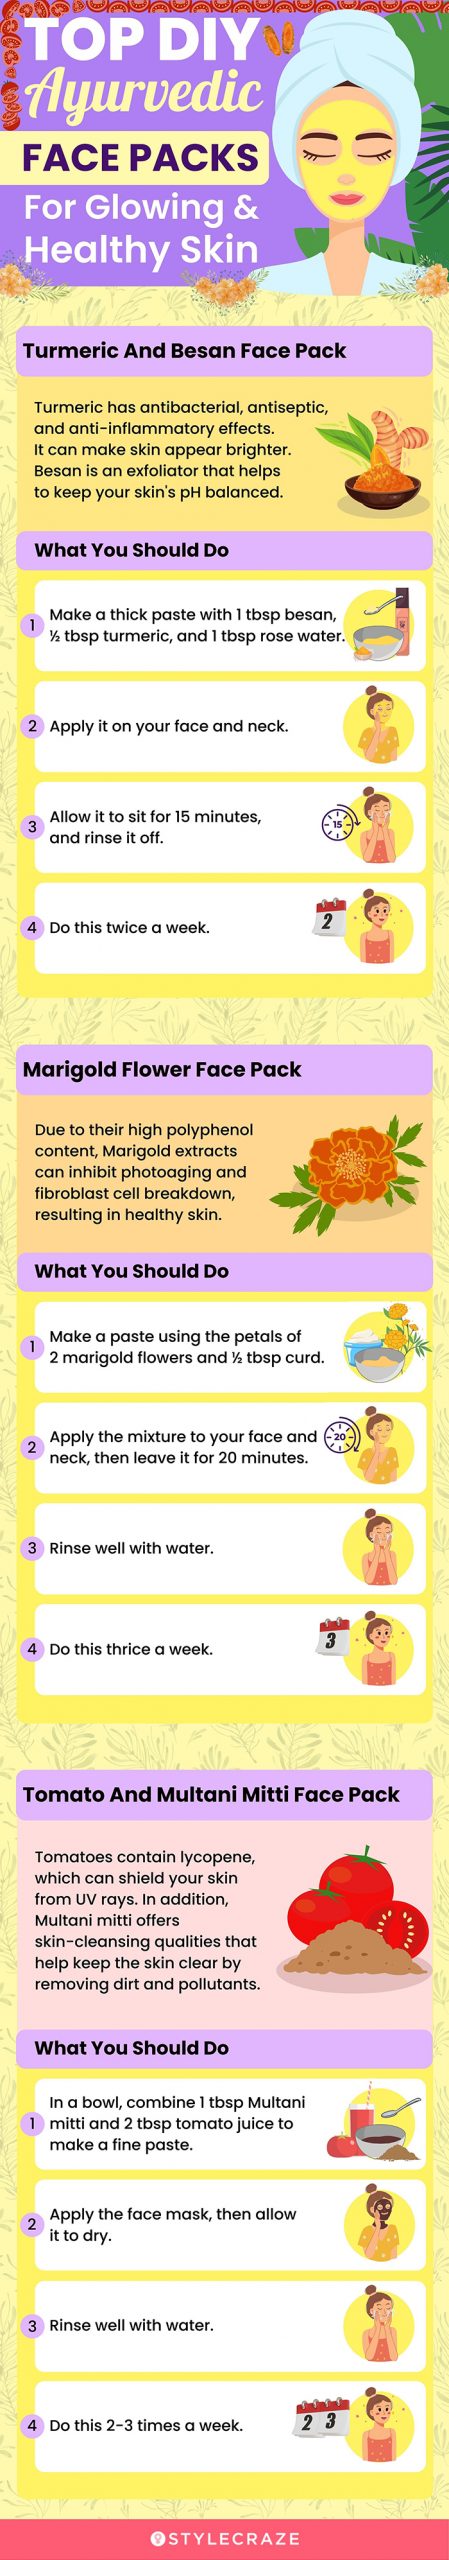 top diy ayurvedic face packs for glowing & healthy skin (infographic)